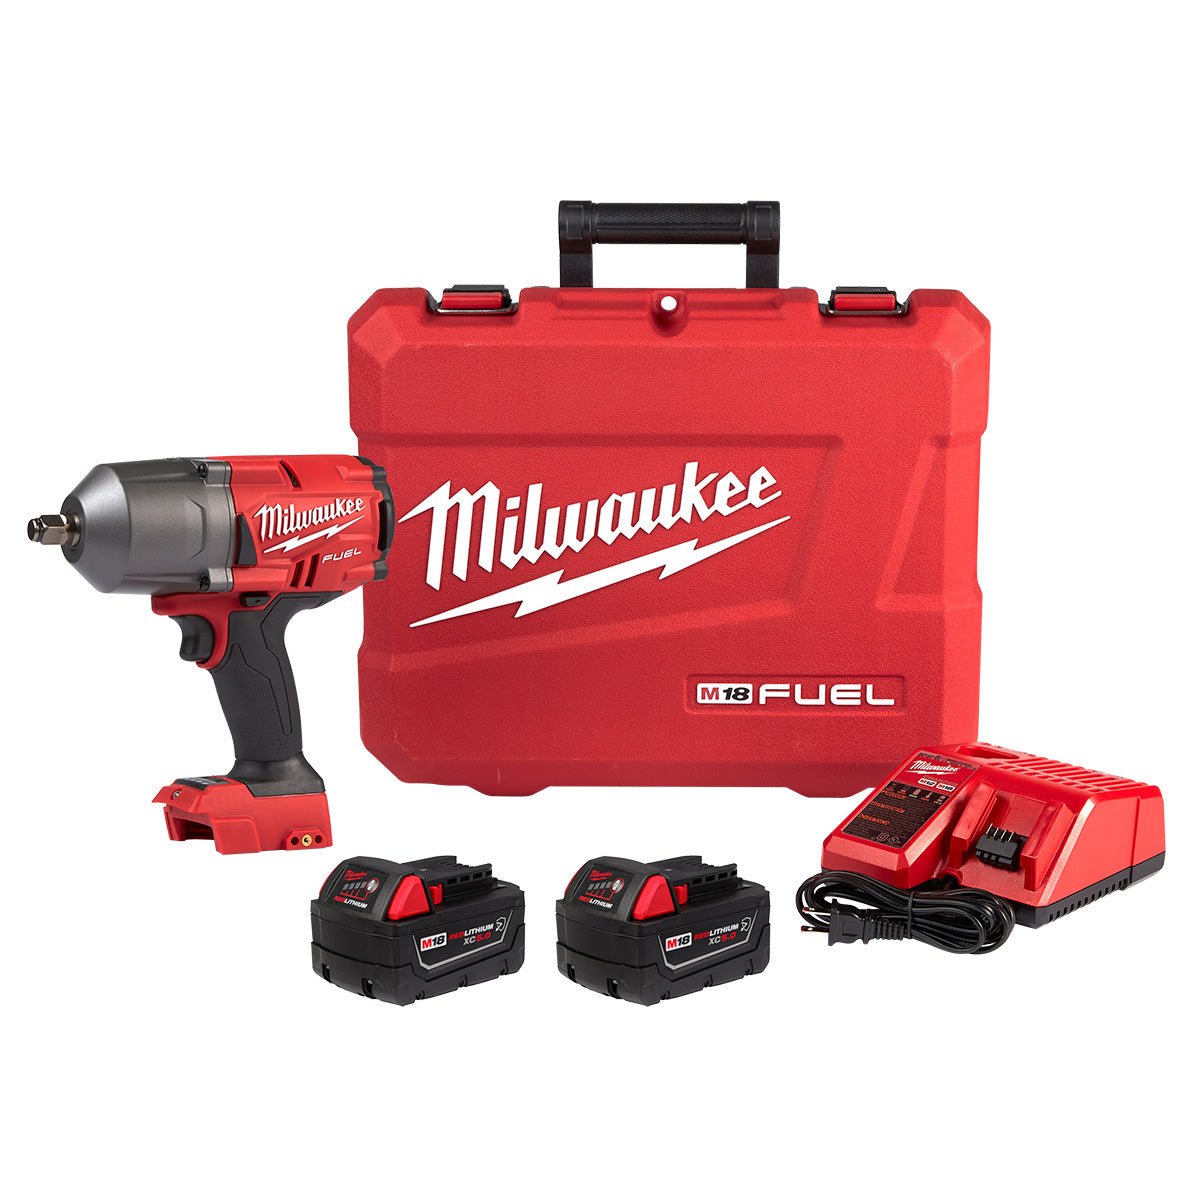 Milwaukee 2767-22R Gen II M18 1/2" High Torque Impact with Friction Ring Kit